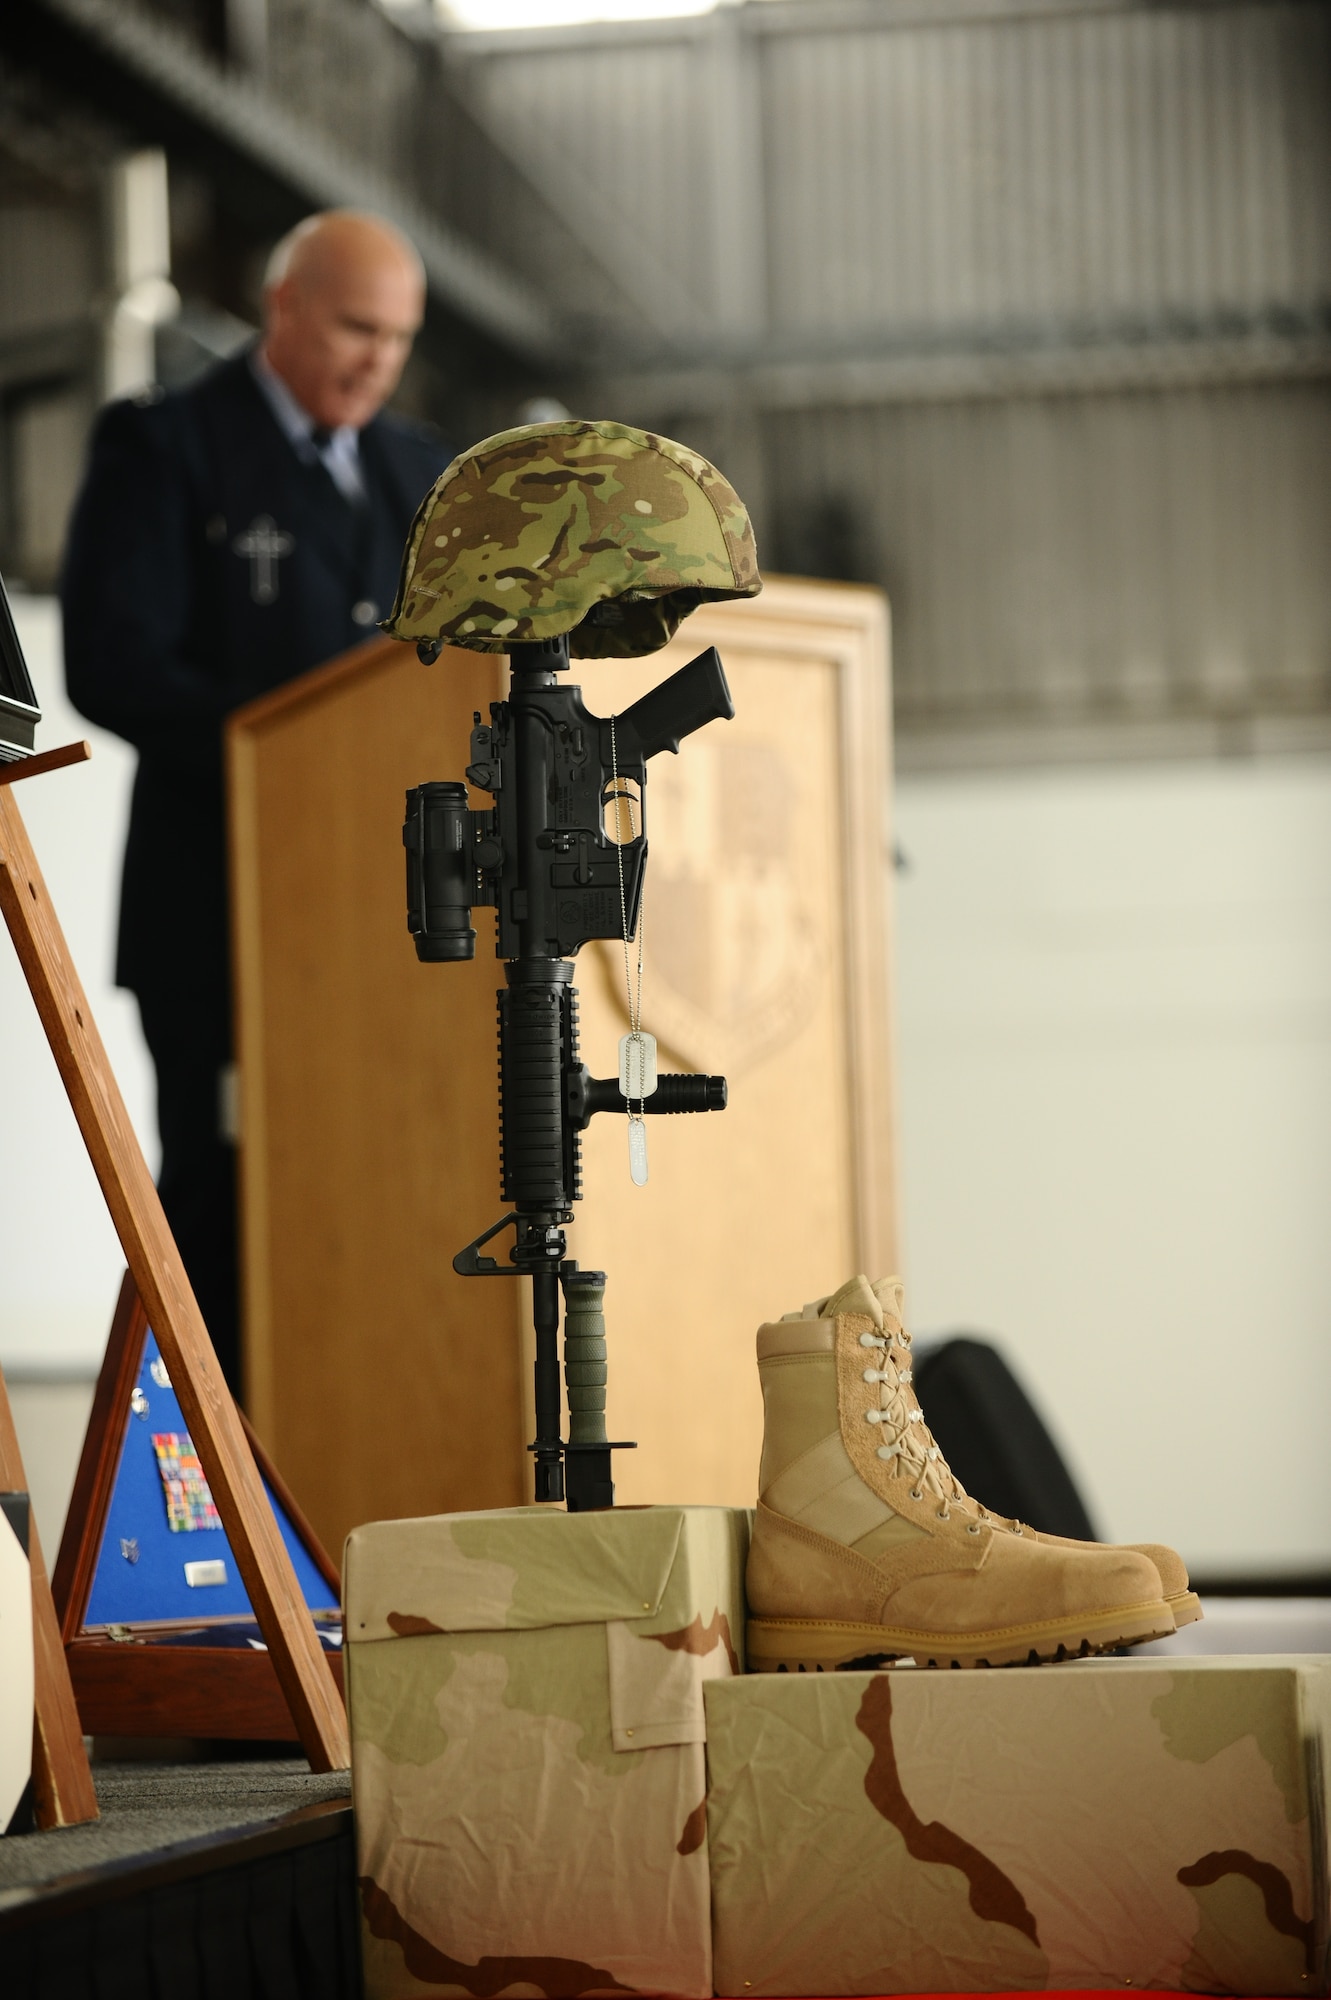 SPANGDAHLEM AIR BASE, Germany – Chaplain Capt. Paul Joyner, 52nd Fighter Wing chaplain, prays during the memorial service for Staff Sgt. Joseph J. Hamski, 52nd Civil Engineer Squadron Explosive Ordnance Disposal Flight, held here June 16. Sergeant Hamski was killed in action May 26, 2011, in Shorabak, Afghanistan, while responding to a known enemy weapons cache. (U.S. Air Force photo/Senior Airman Nathanael Callon)